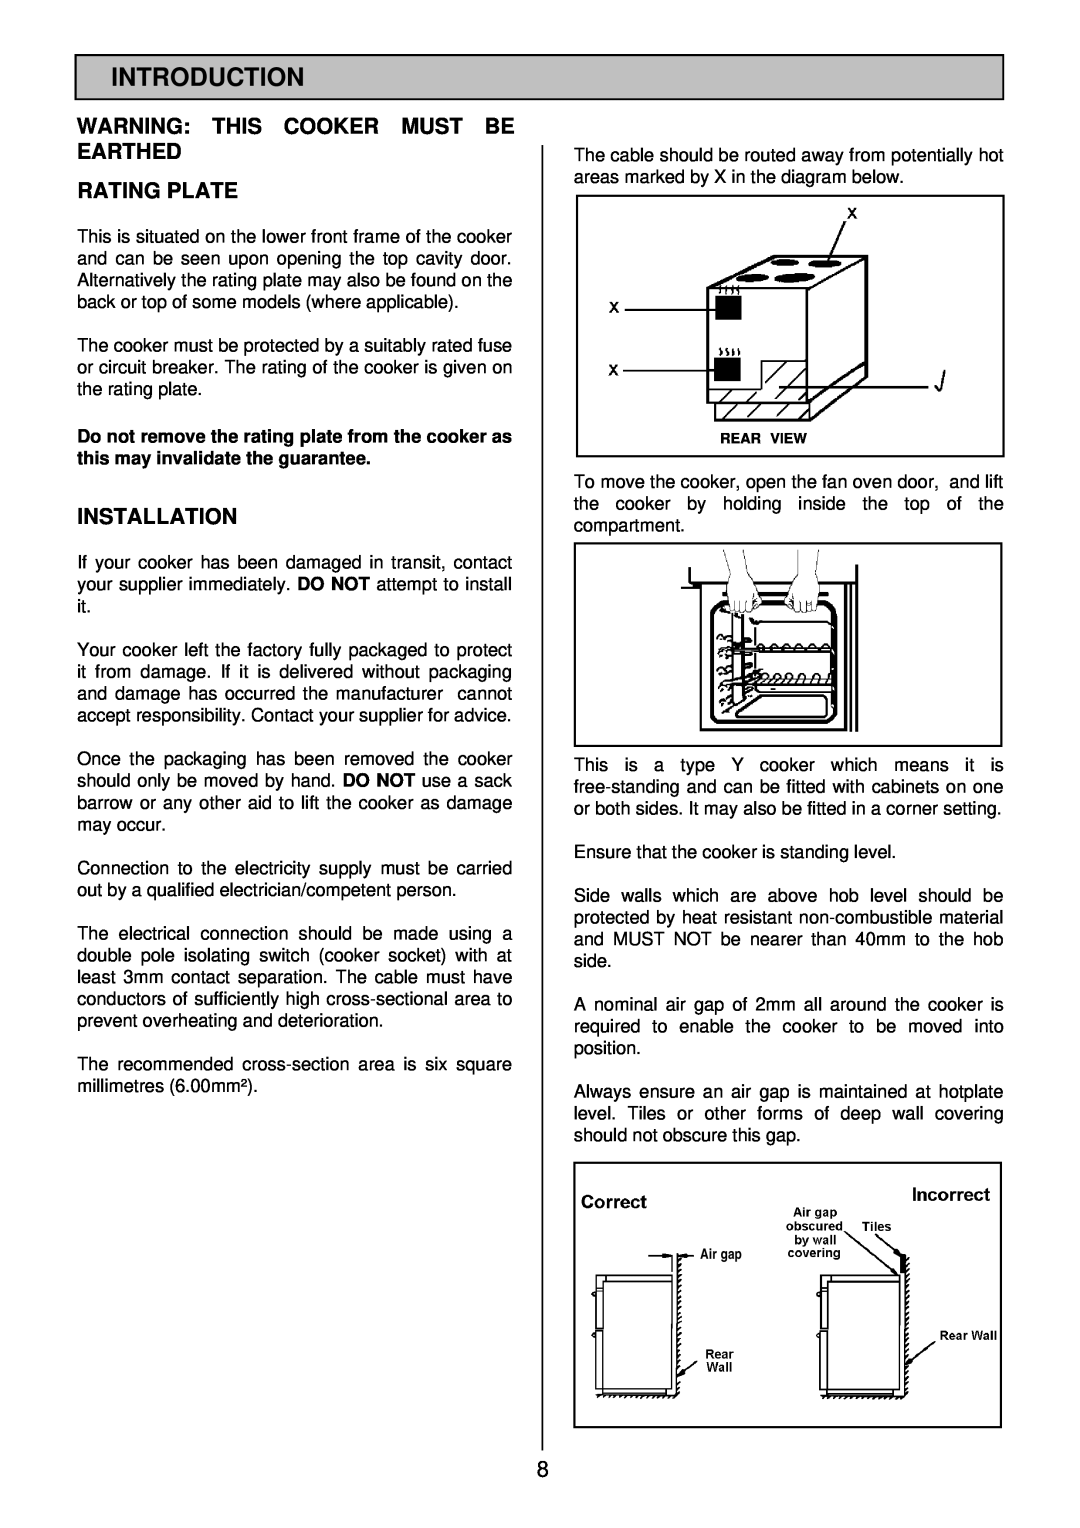 Zanussi ZCE 7700X manual Introduction, Warning This Cooker Must Be Earthed Rating Plate, Installation 